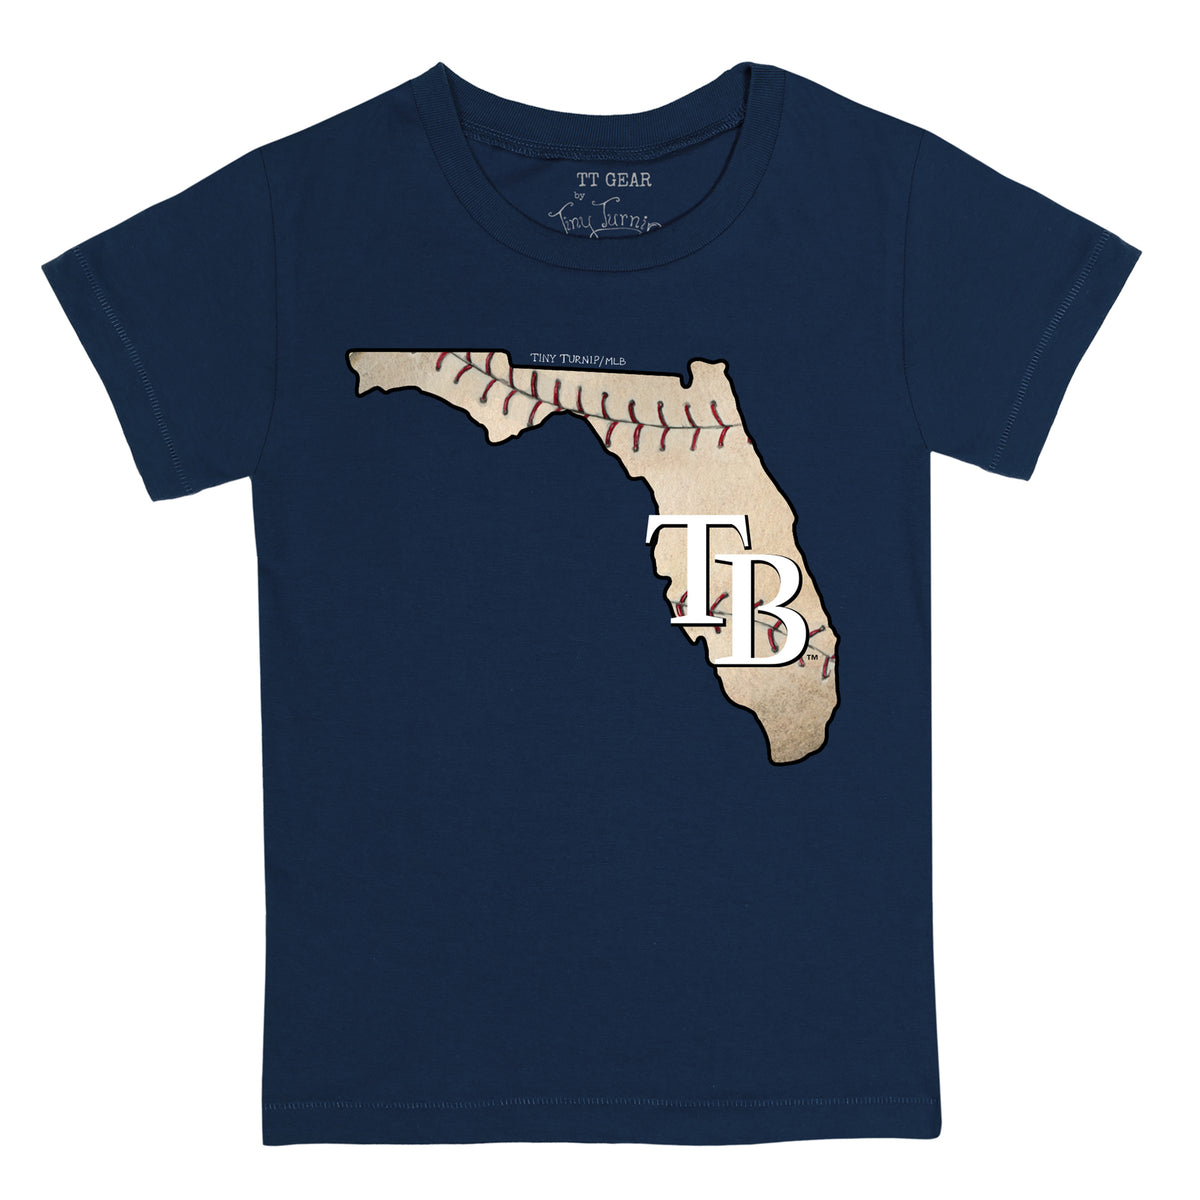 Tampa Bay Rays Stacked Tee Shirt 18M / Navy Blue